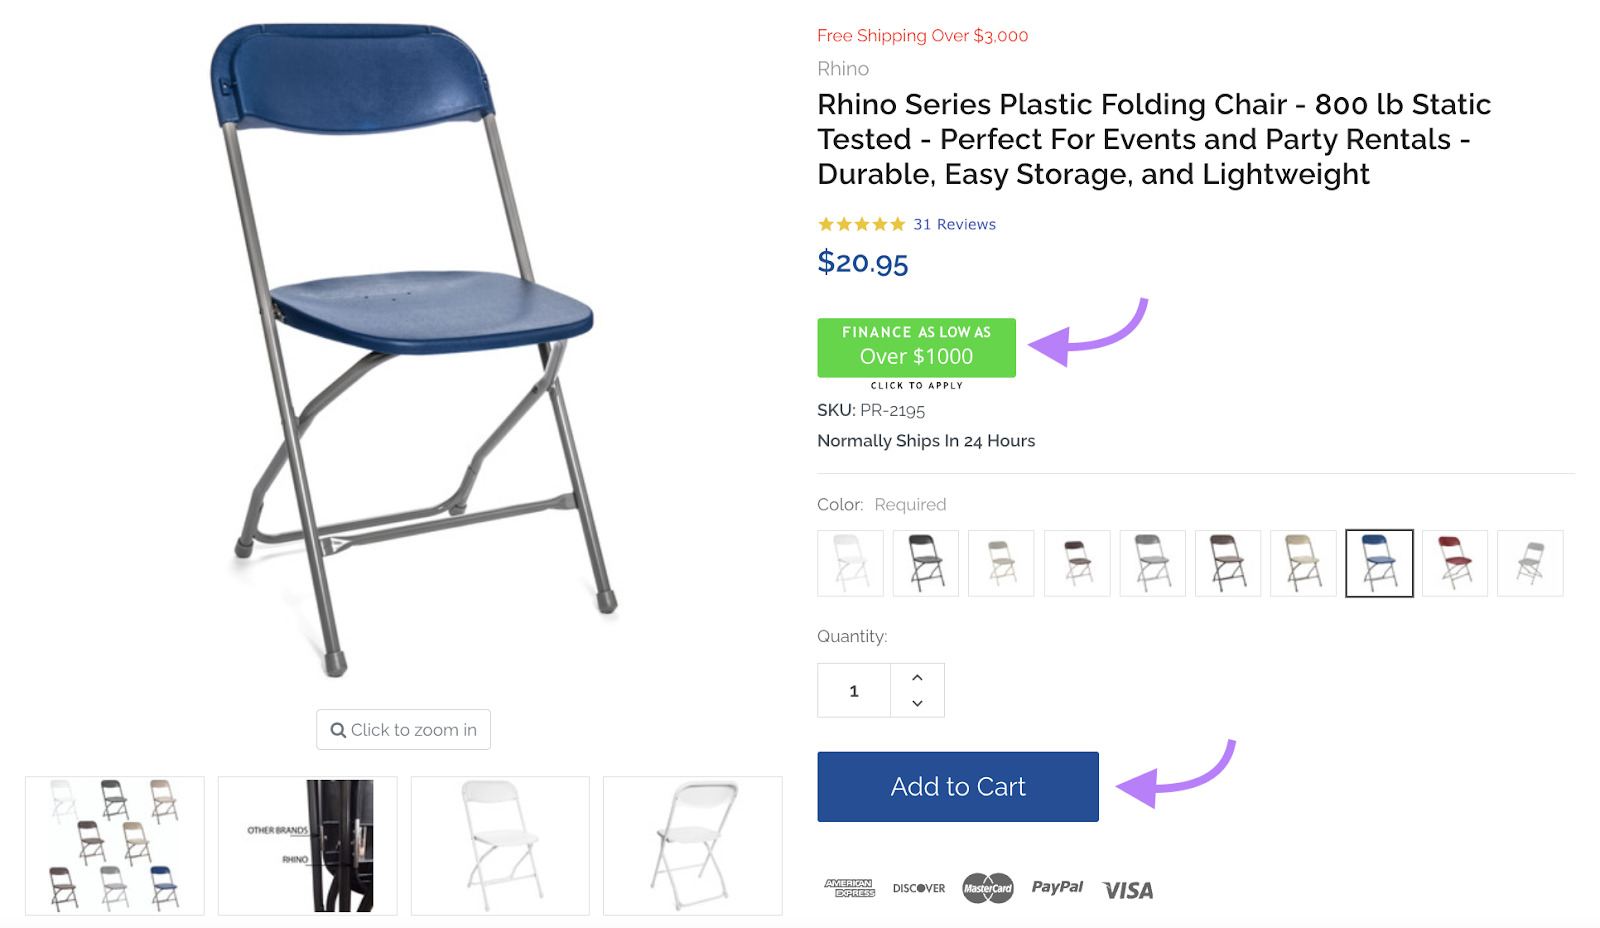 Folding Chairs and Tables product page